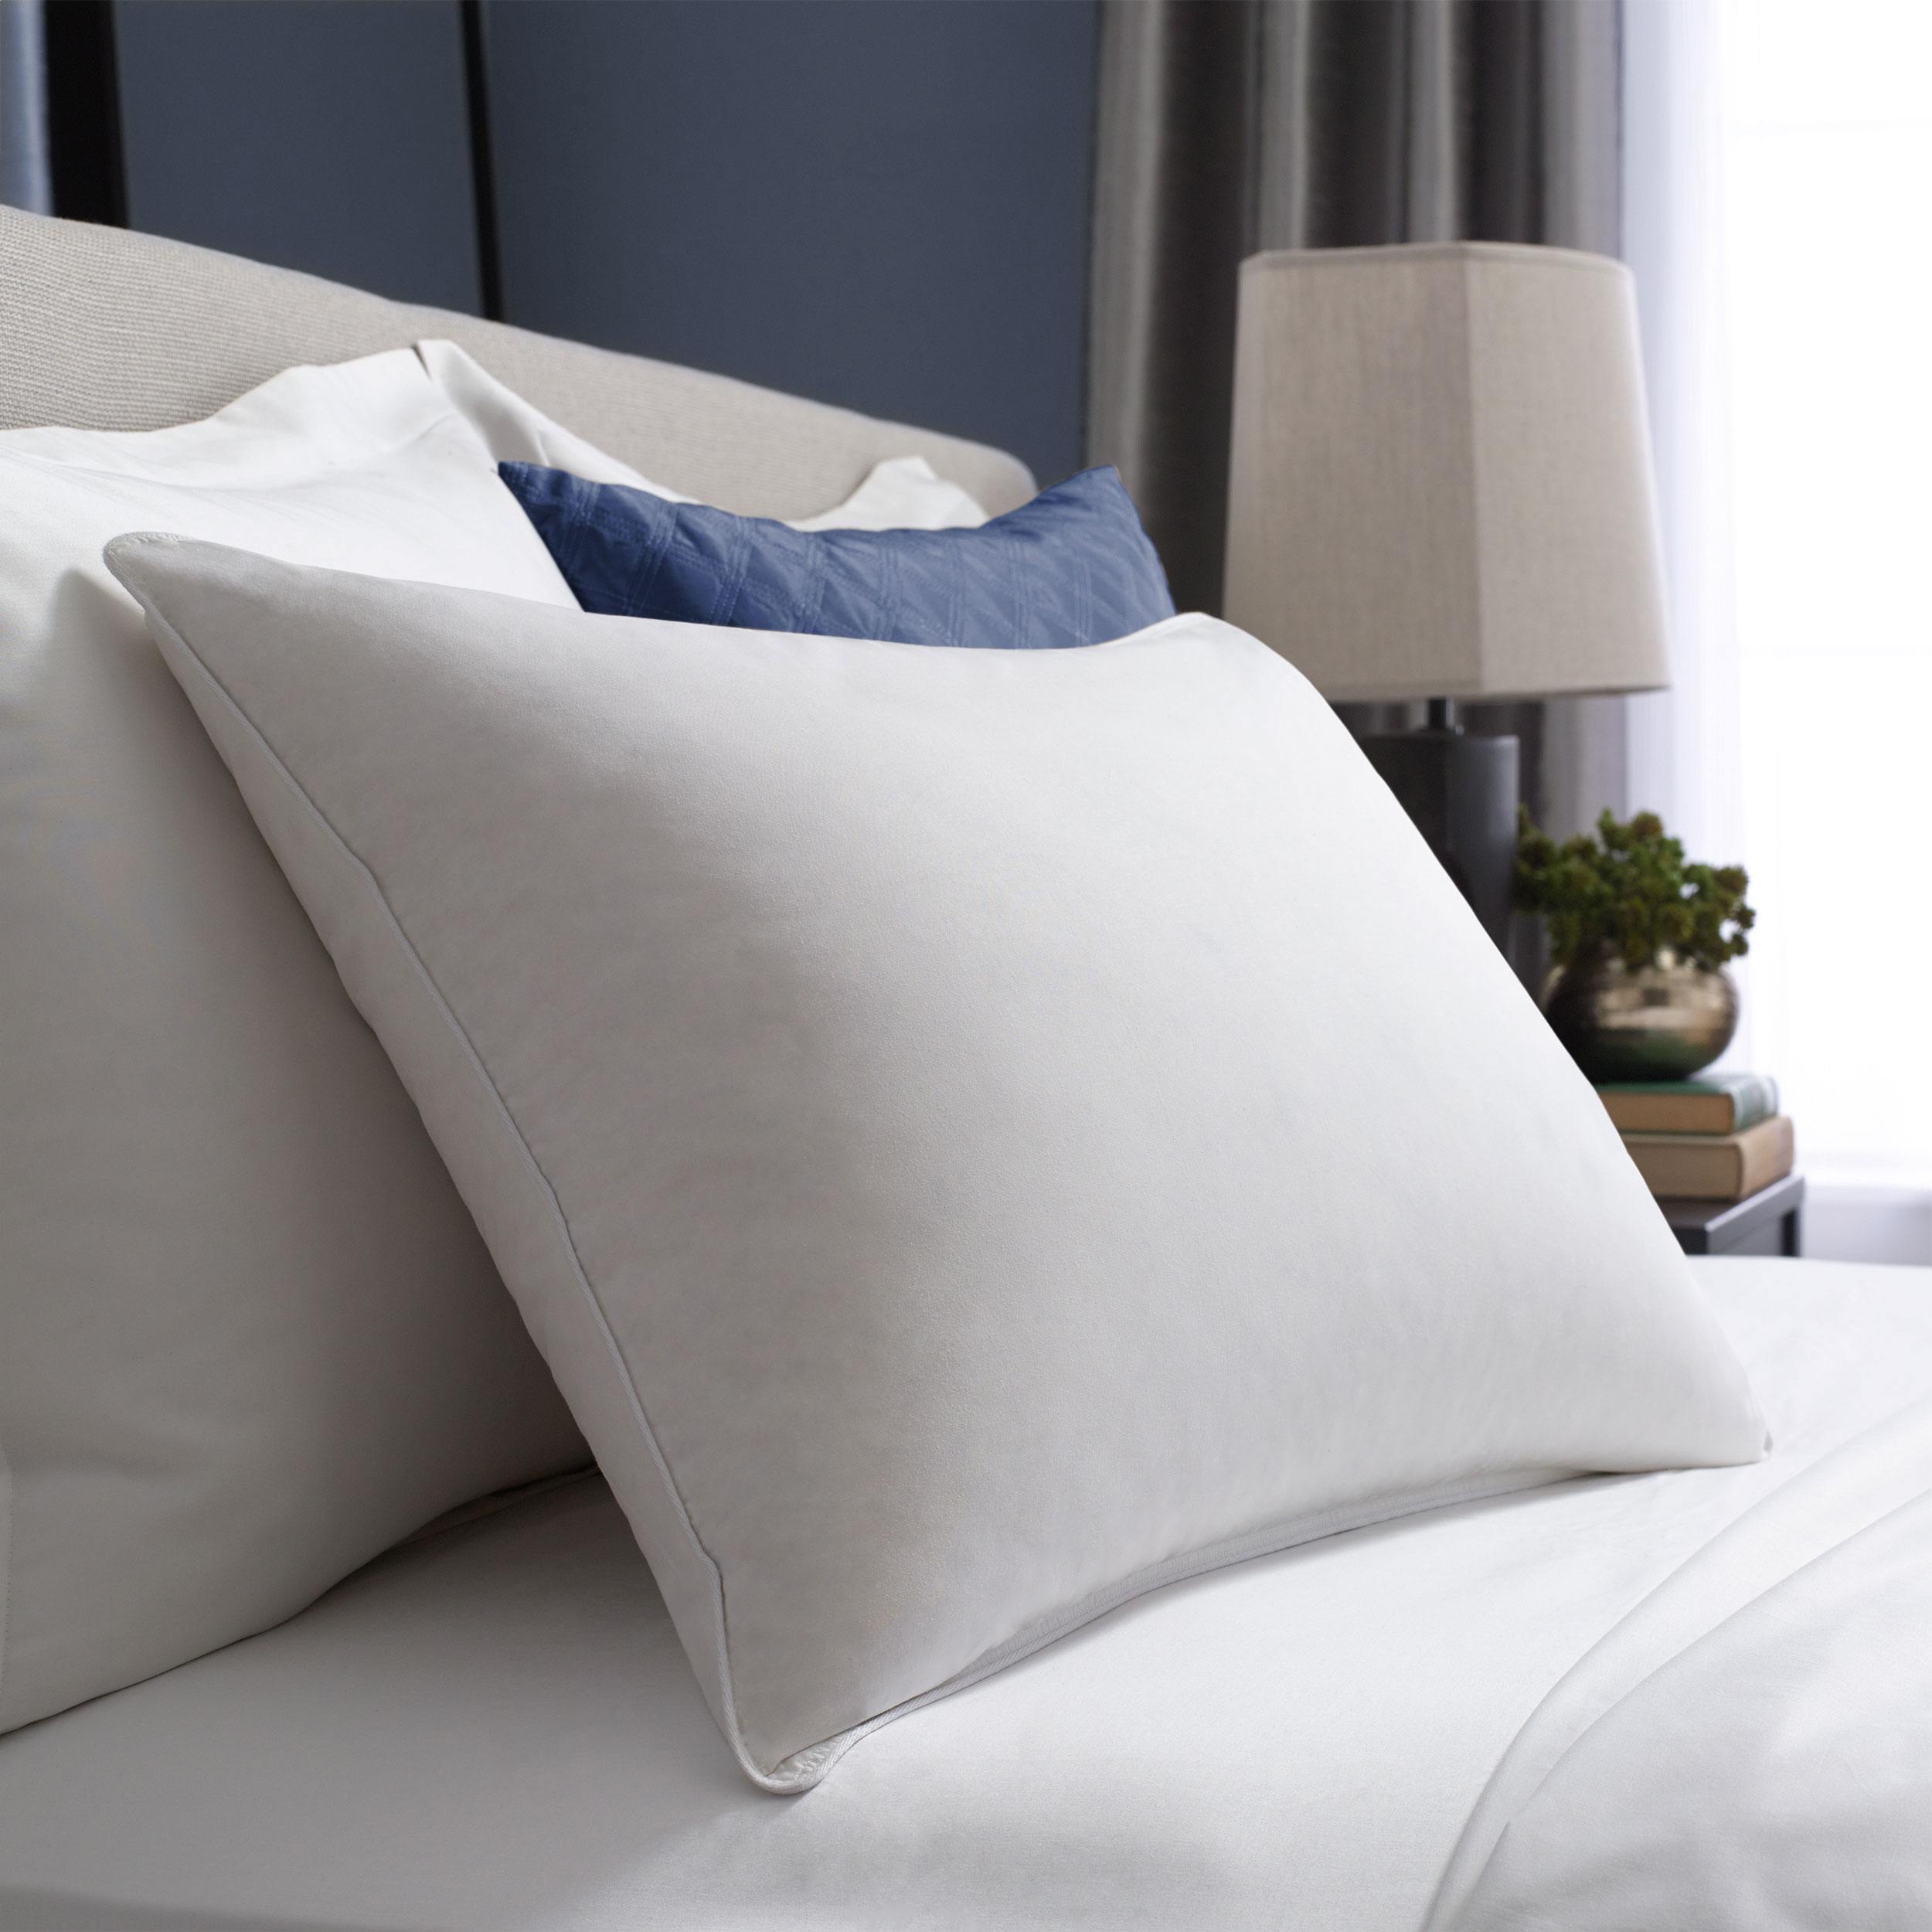 Image of Hotel White Goose Down Luxury Pillow King | Pacific Coast Bedding